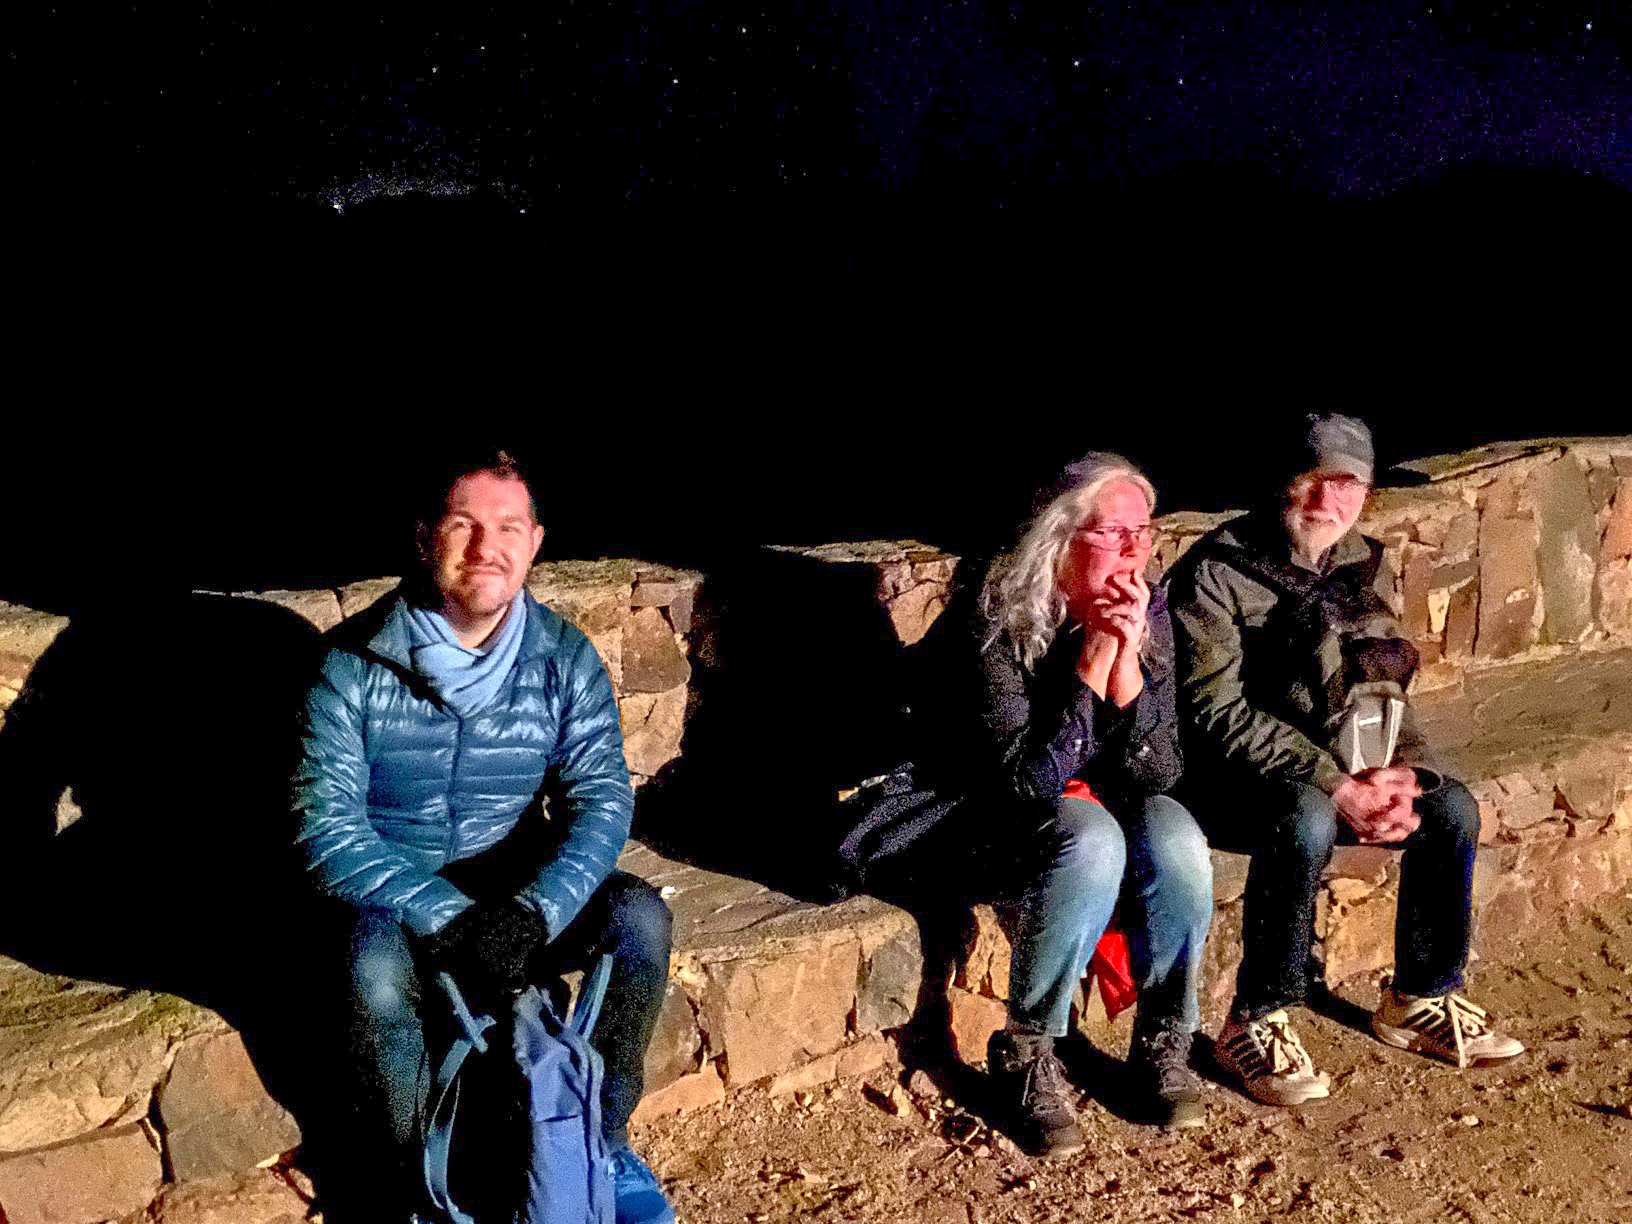 Karl and two walkers rest on a stone bench at night, Mount Sinai, Egypt